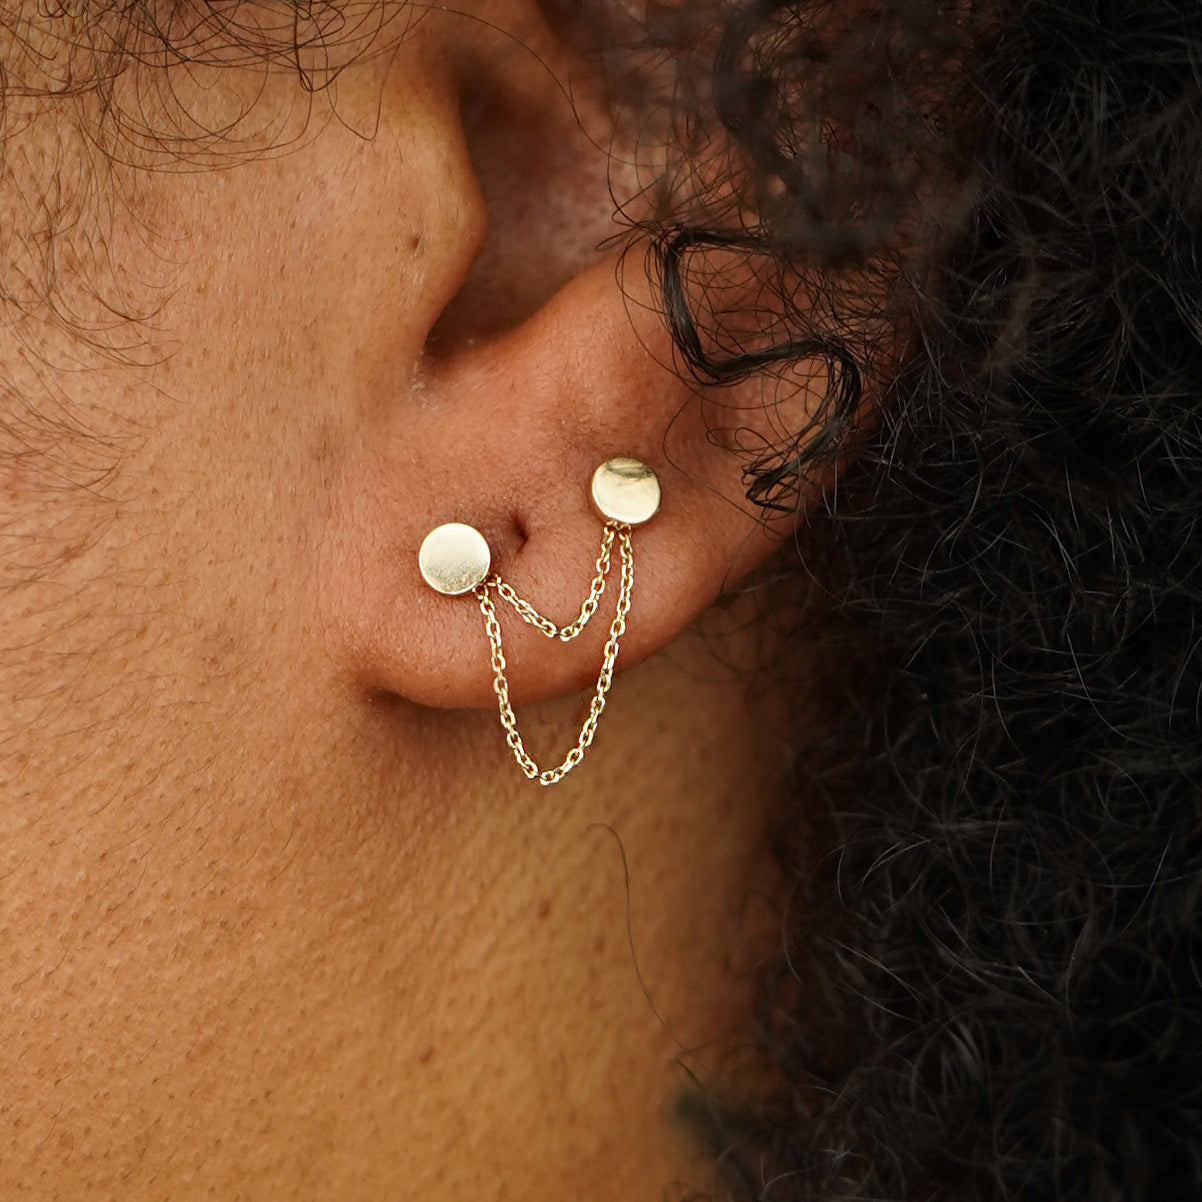 A model's ear wearing two Circle Studs with a yellow gold Cable Chain Connector in front of their lobe